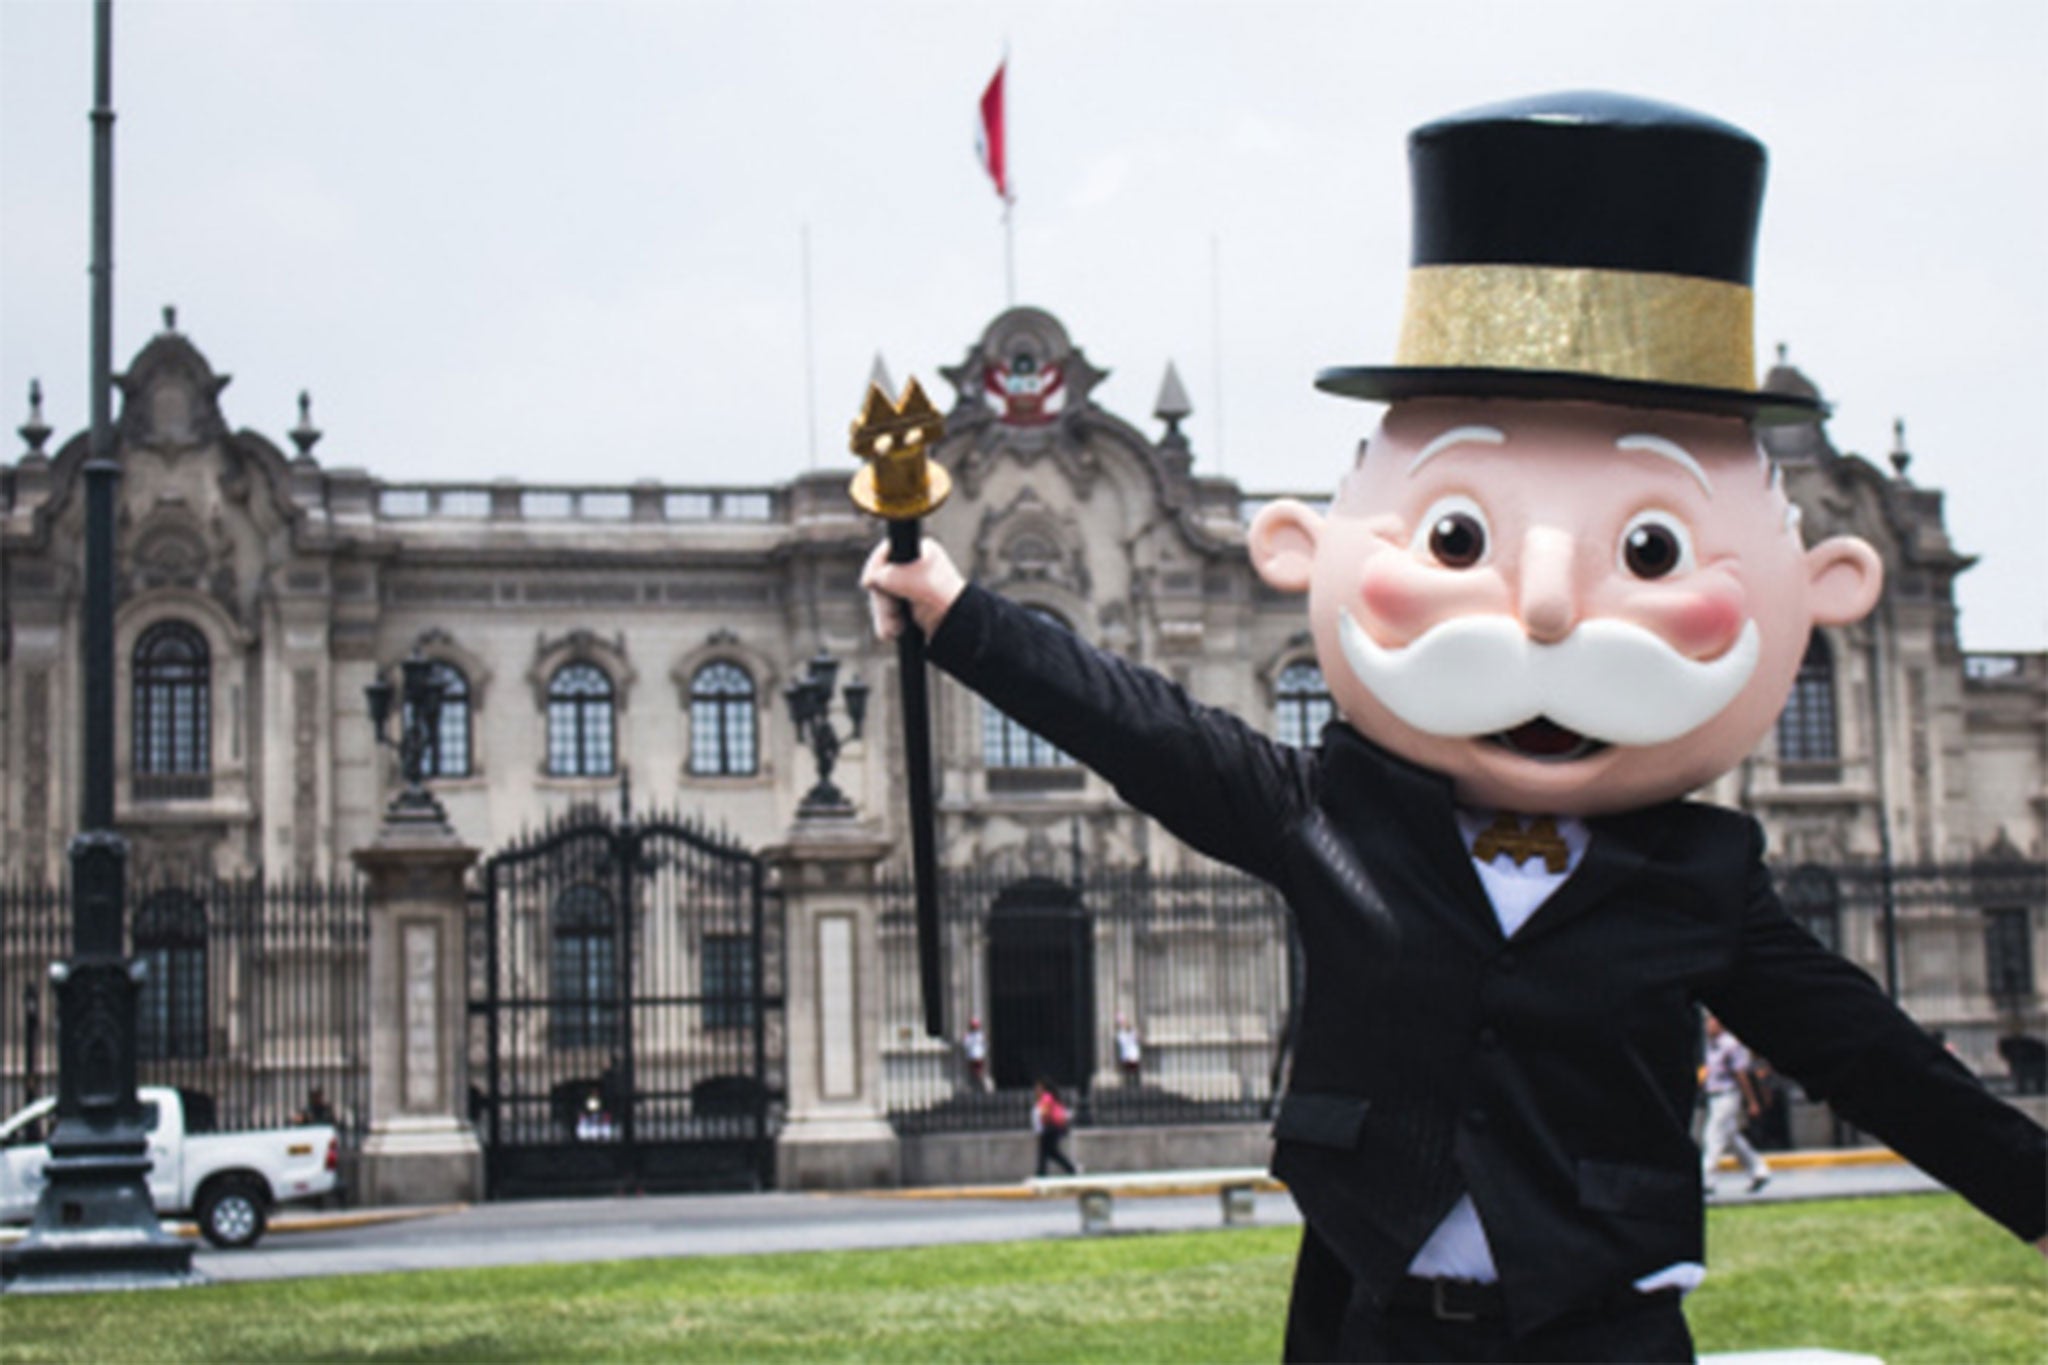 Mr Monopoly celebrates in front of the Government Palace of Peru in Lima